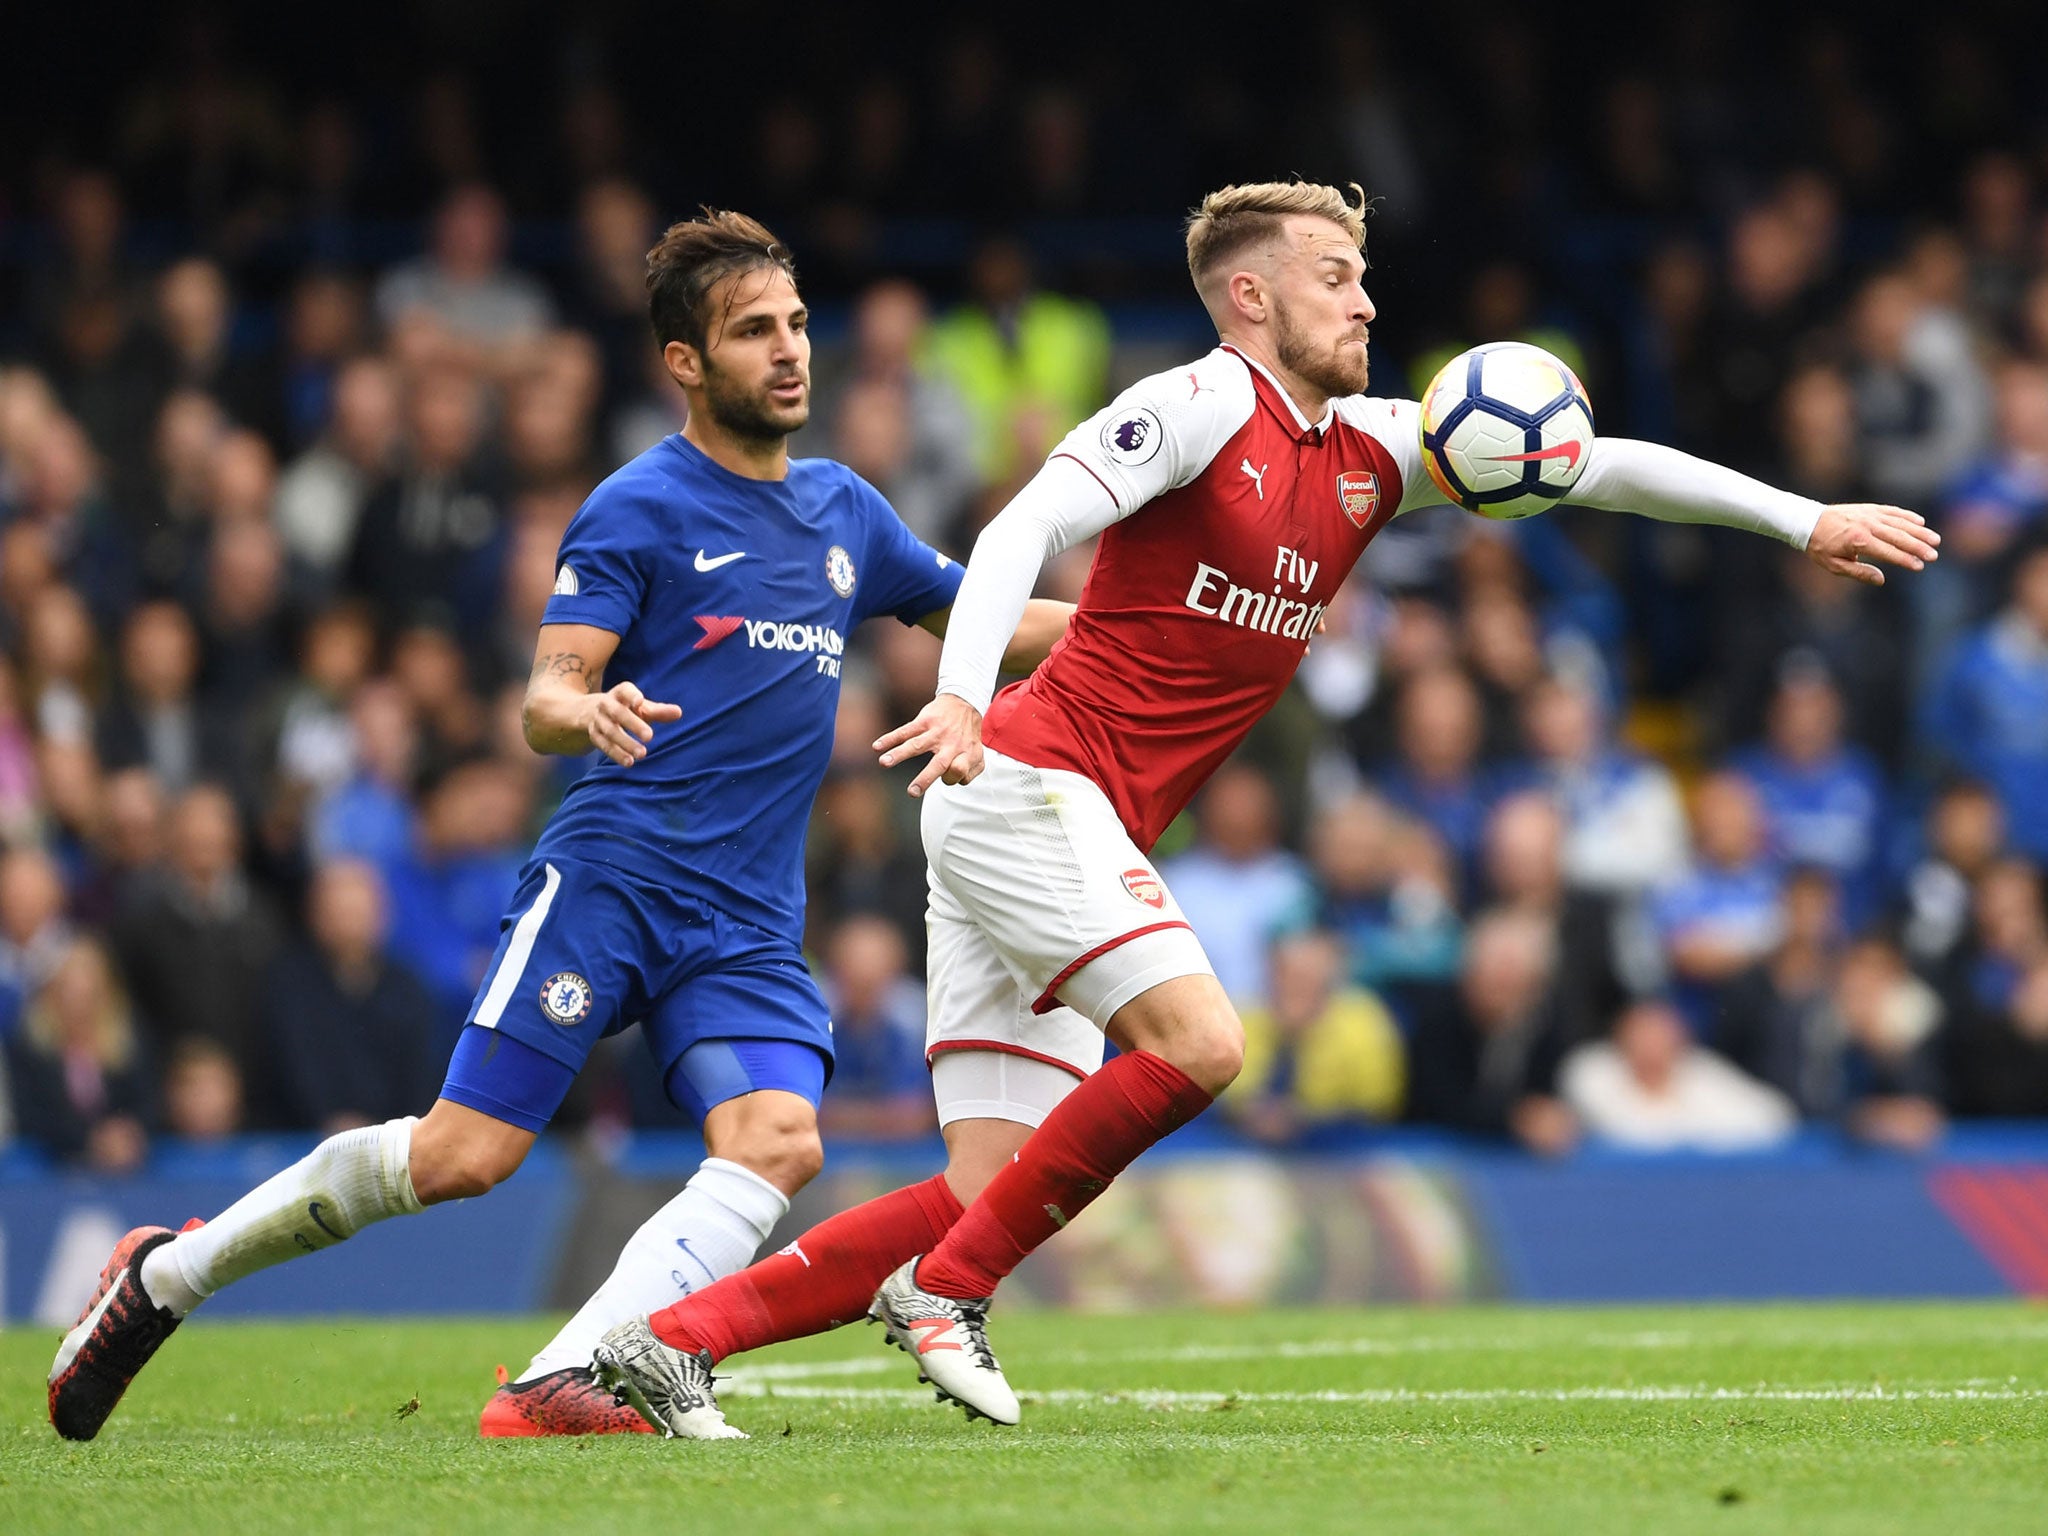 Aaron Ramsey enjoyed a dominant performance in the centre of the park